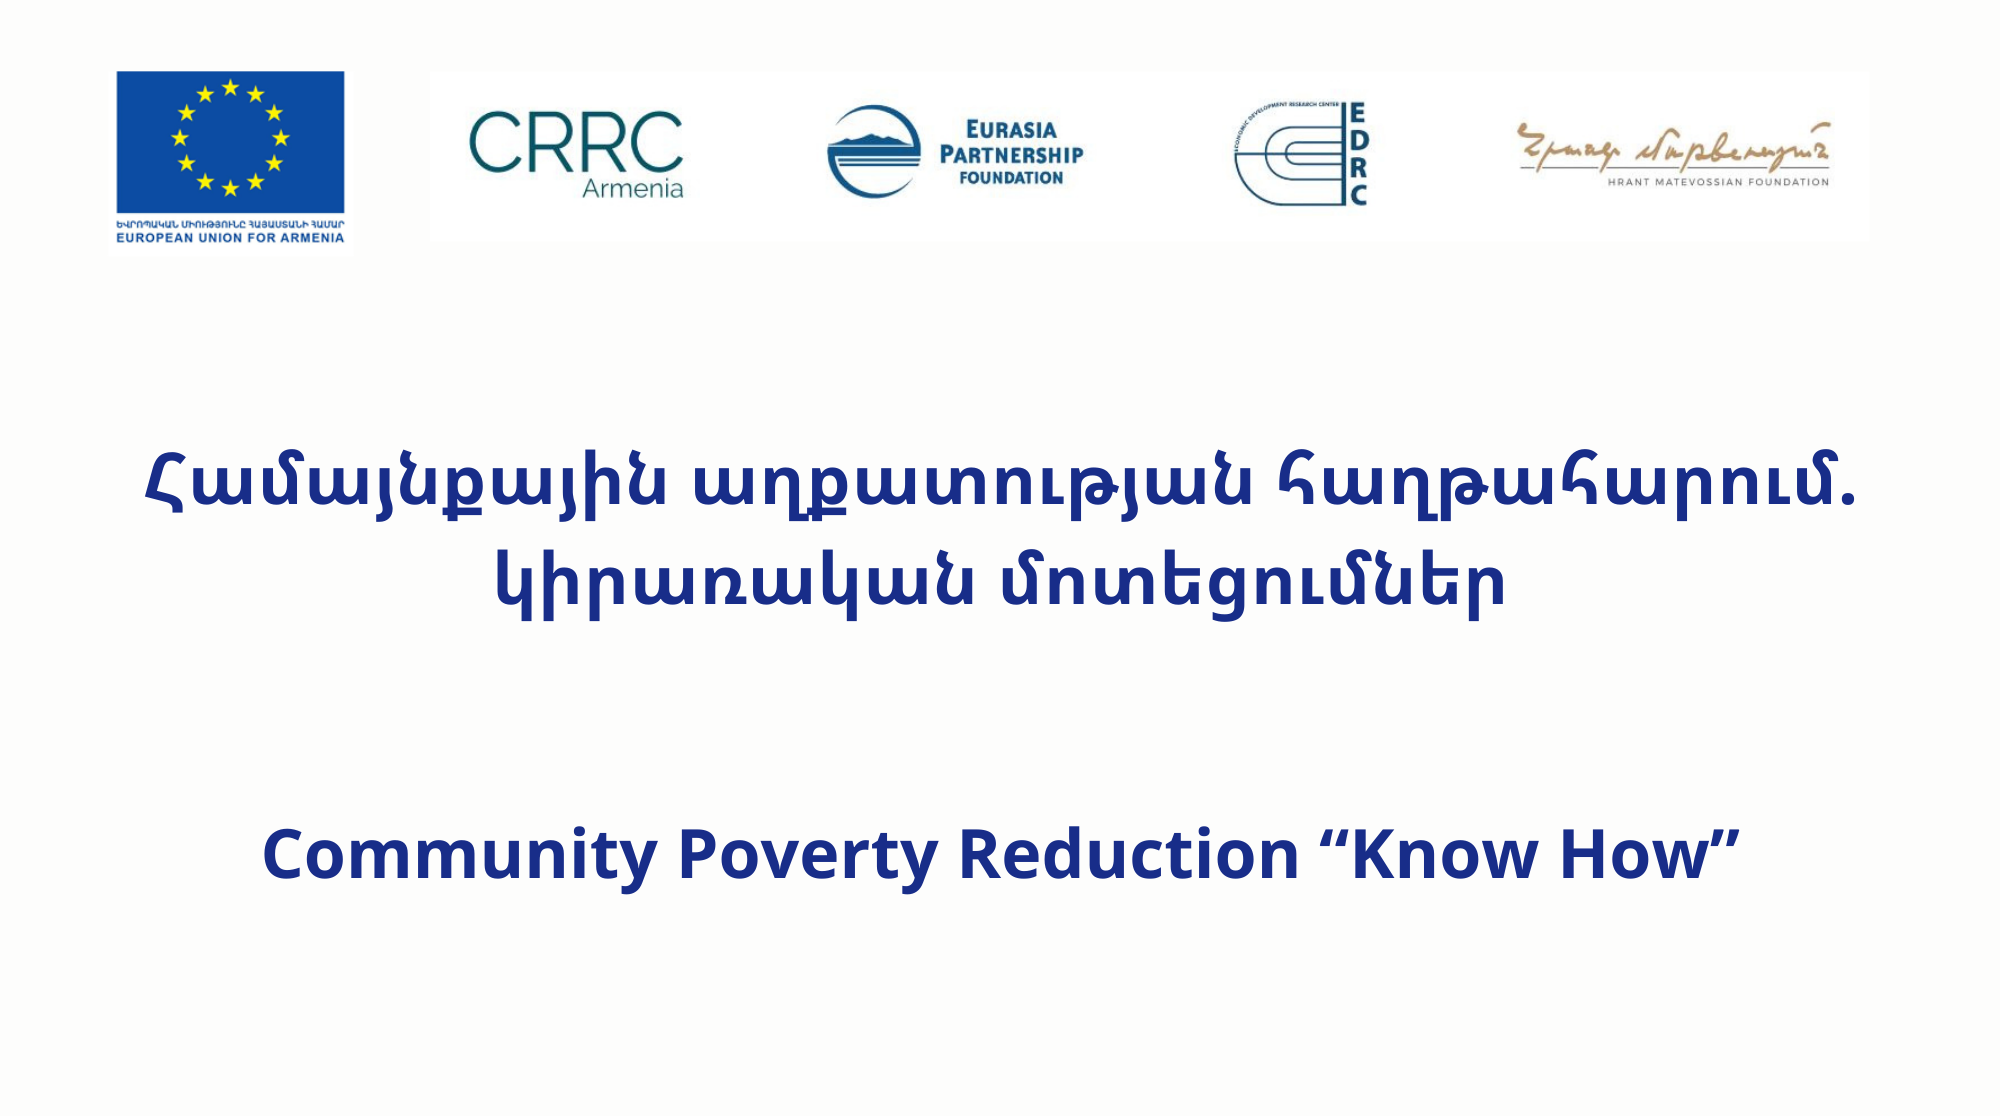 Community Poverty Reduction “Know How” Project